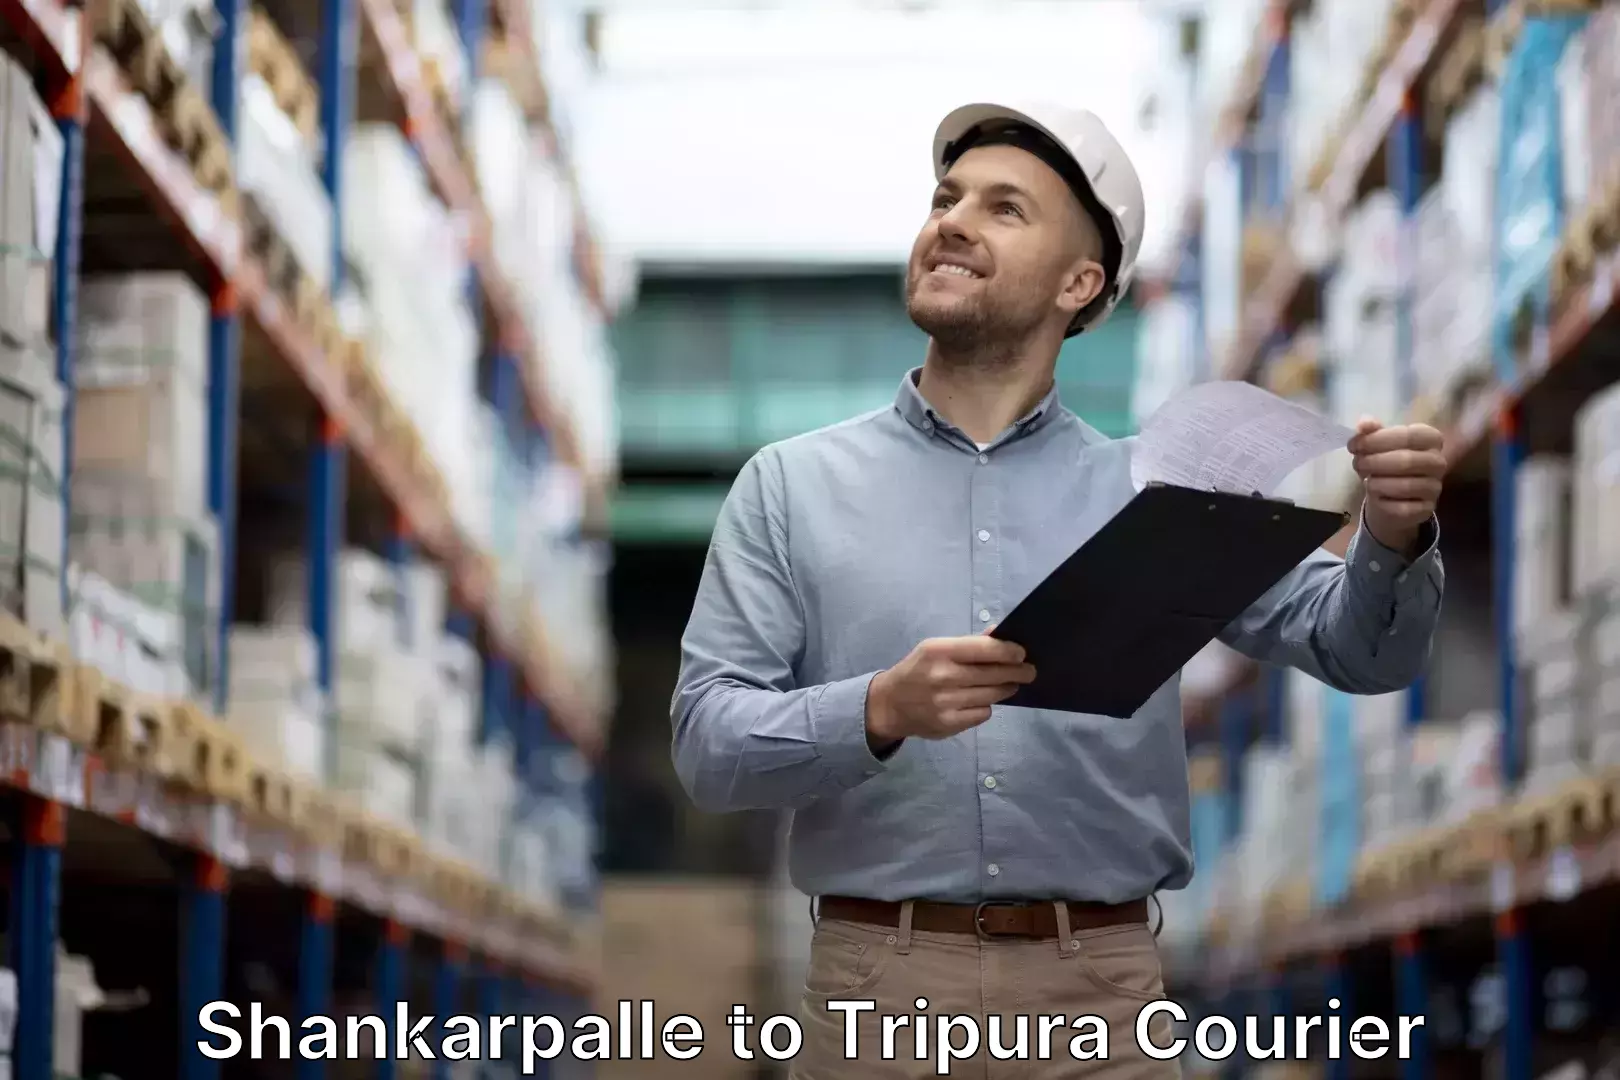 Luggage shipping specialists Shankarpalle to Udaipur Tripura